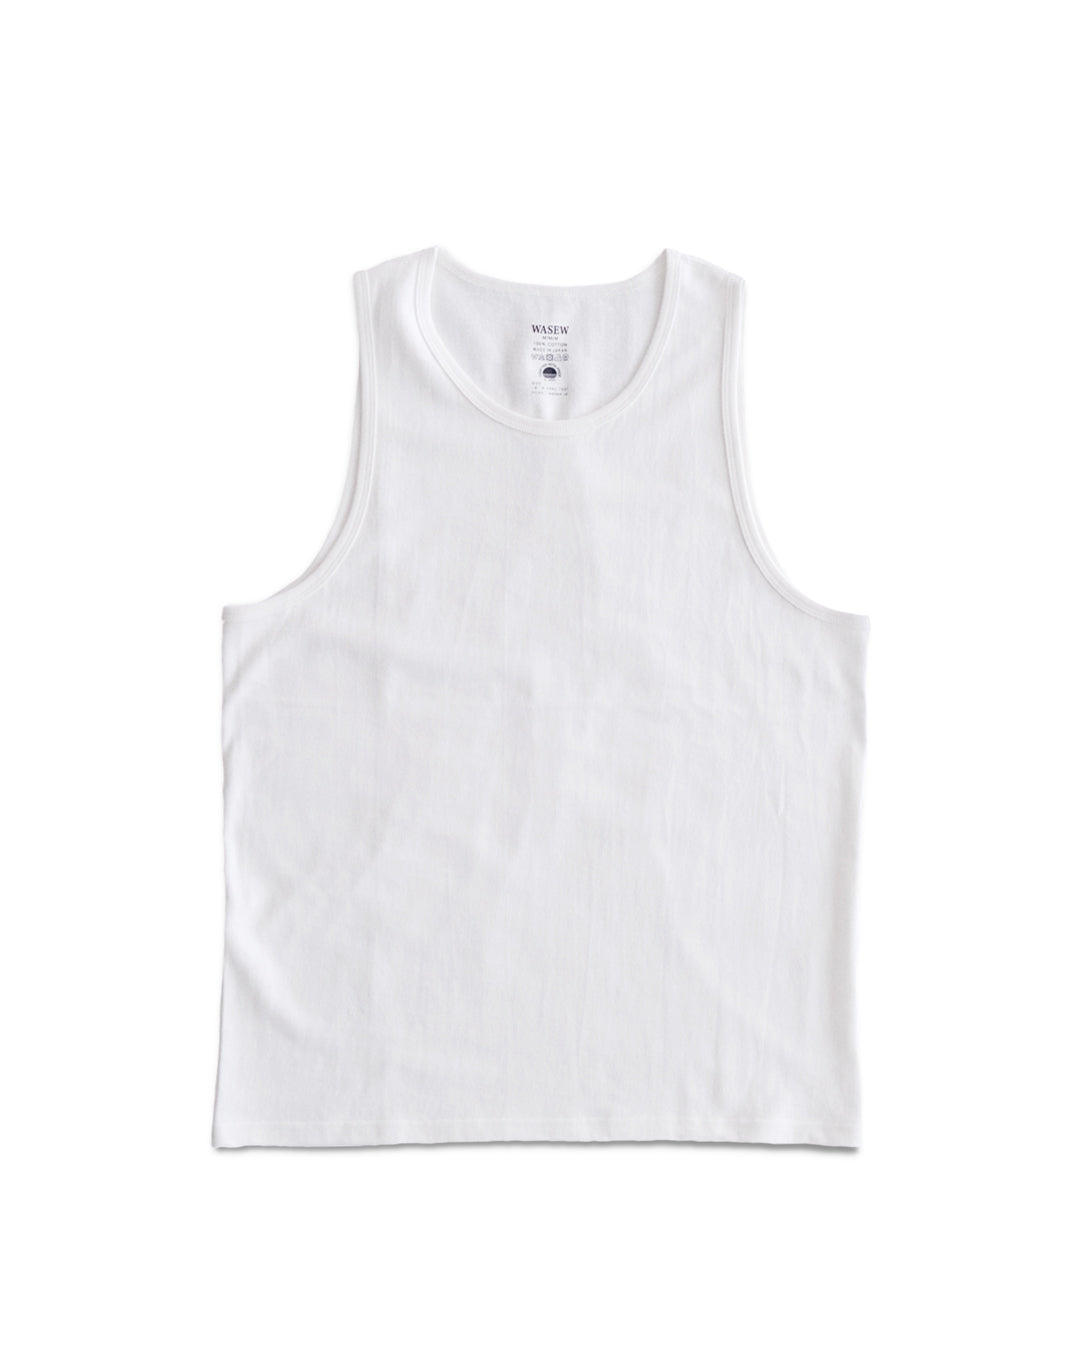 ONE DAY TANKTOP (2PACK)